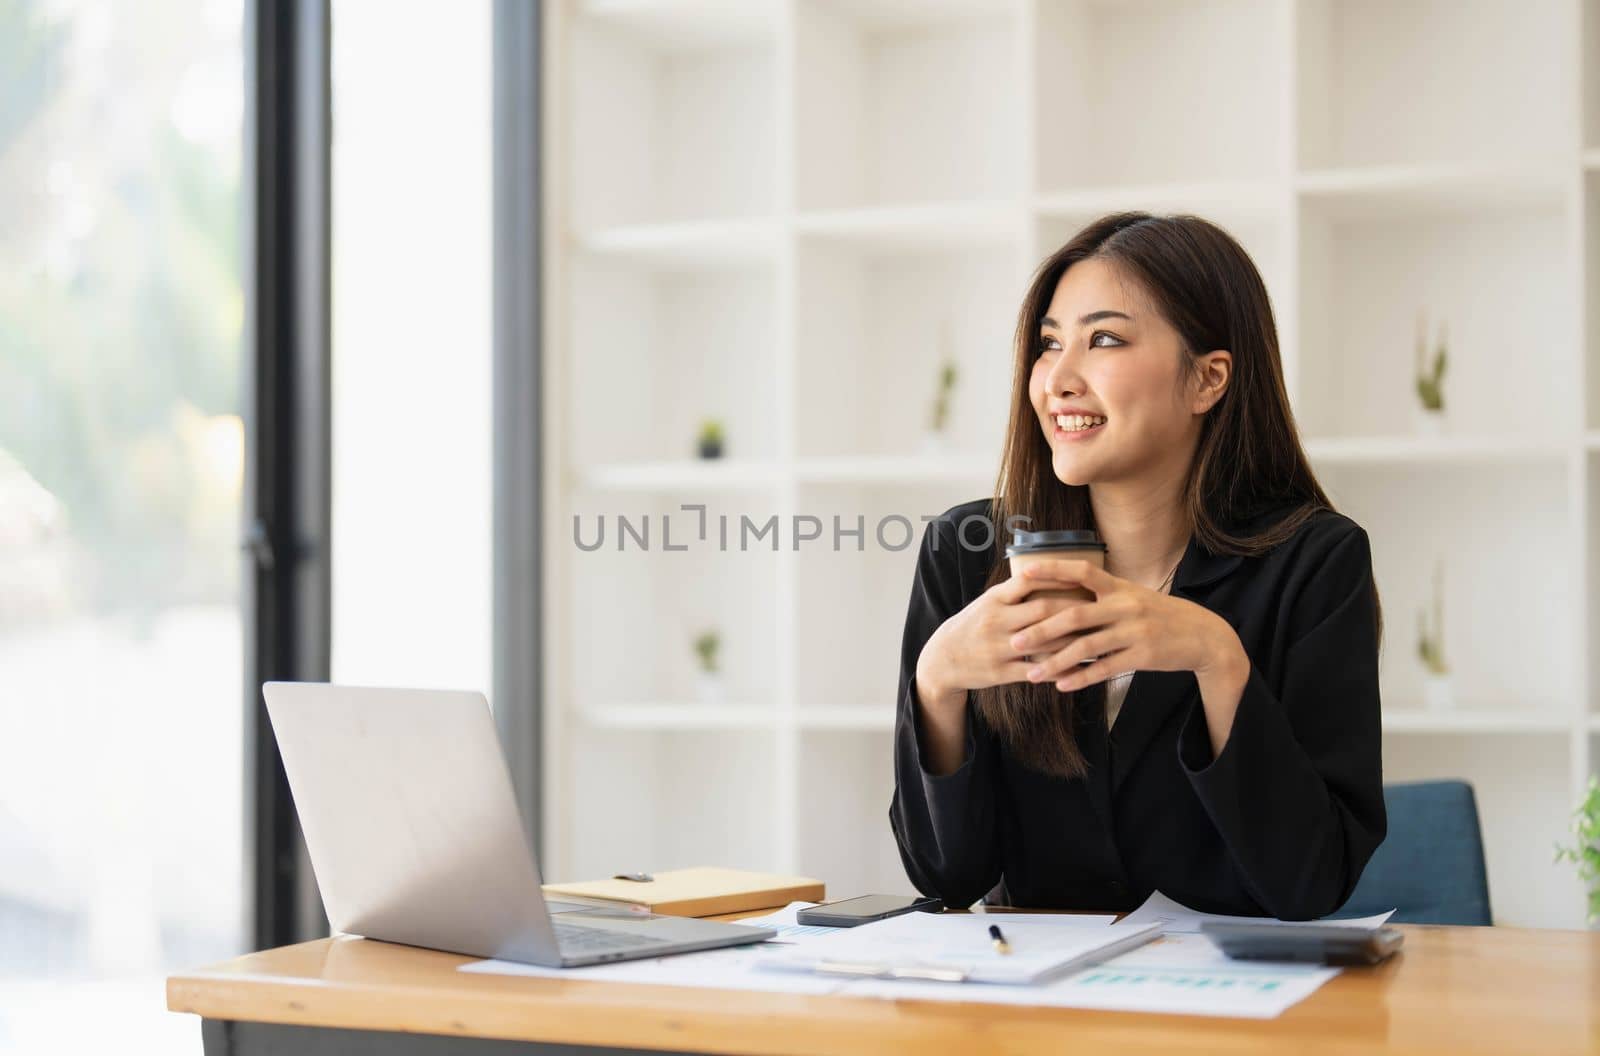 Beautiful young Asian businesswoman smiling holding a coffee mug and laptop working at the office...